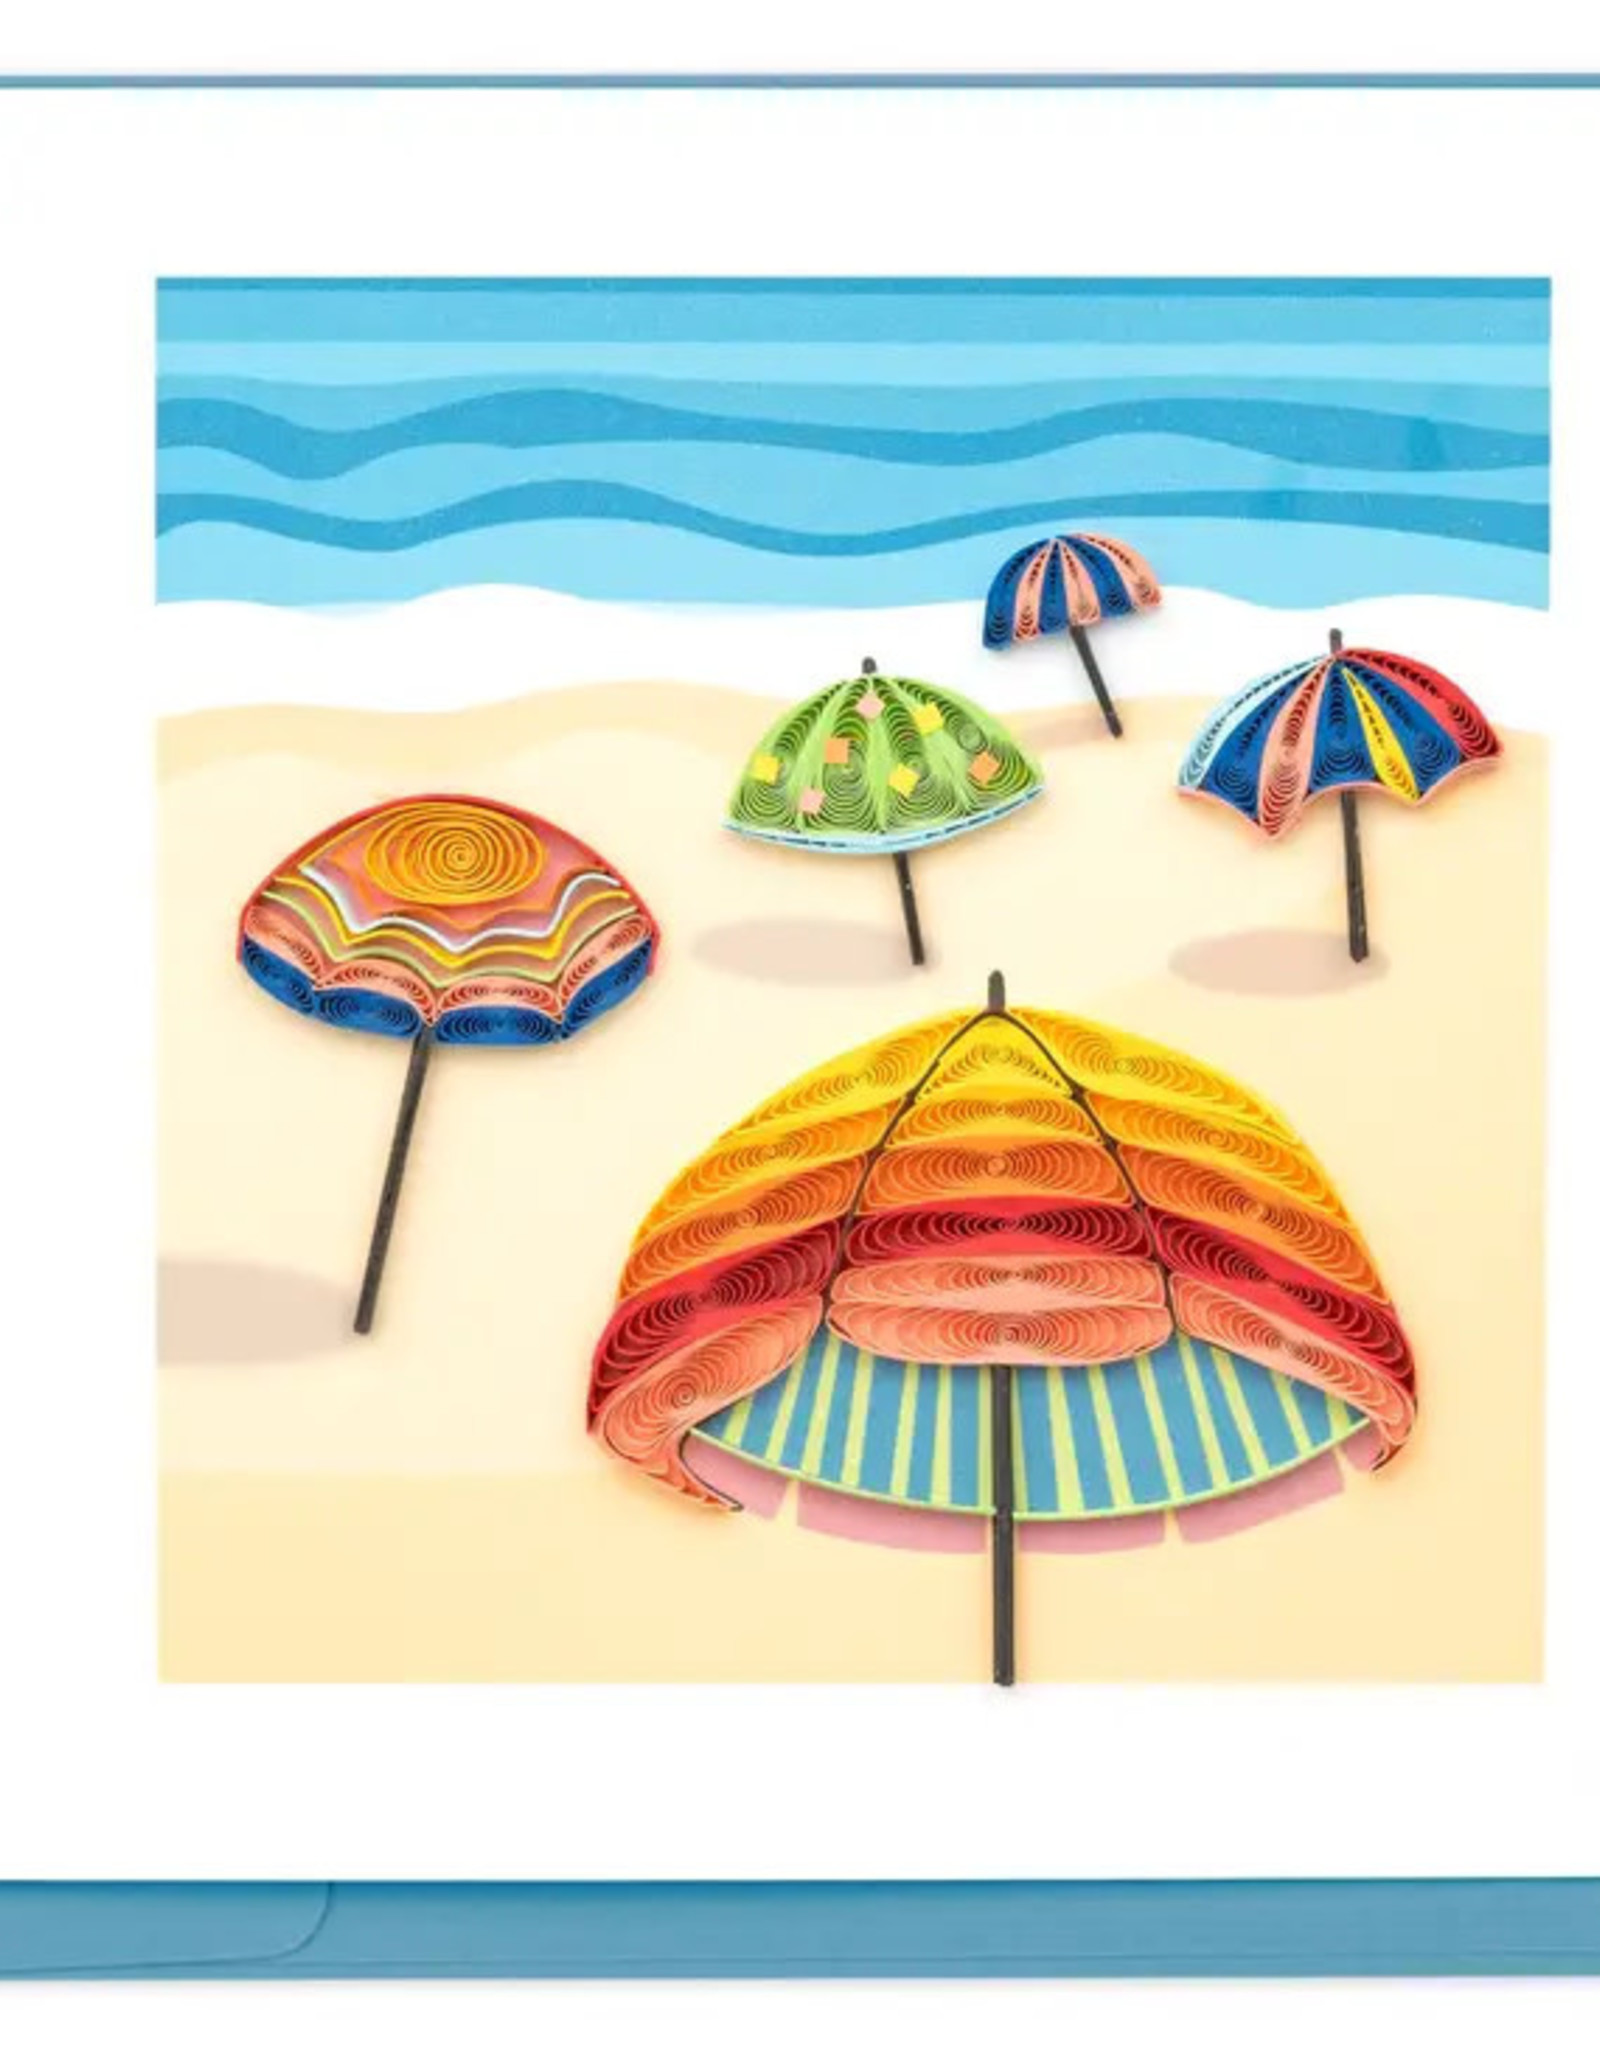 Quilling Card Quilled Beach Umbrellas Greeting Card